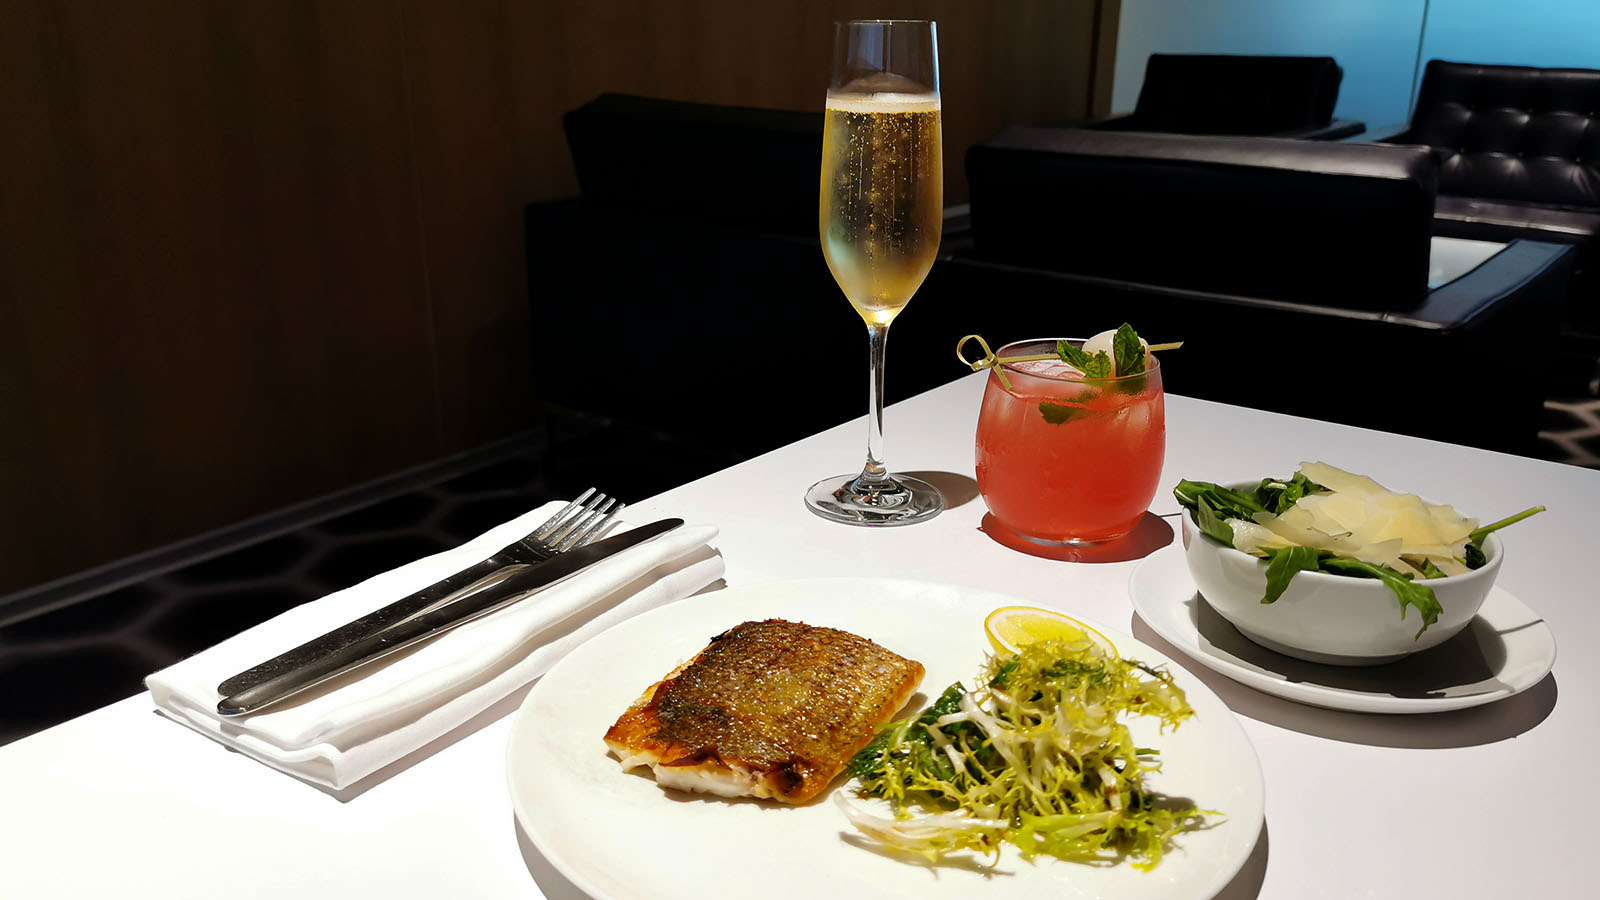 Bass main course in the Qantas First Lounge